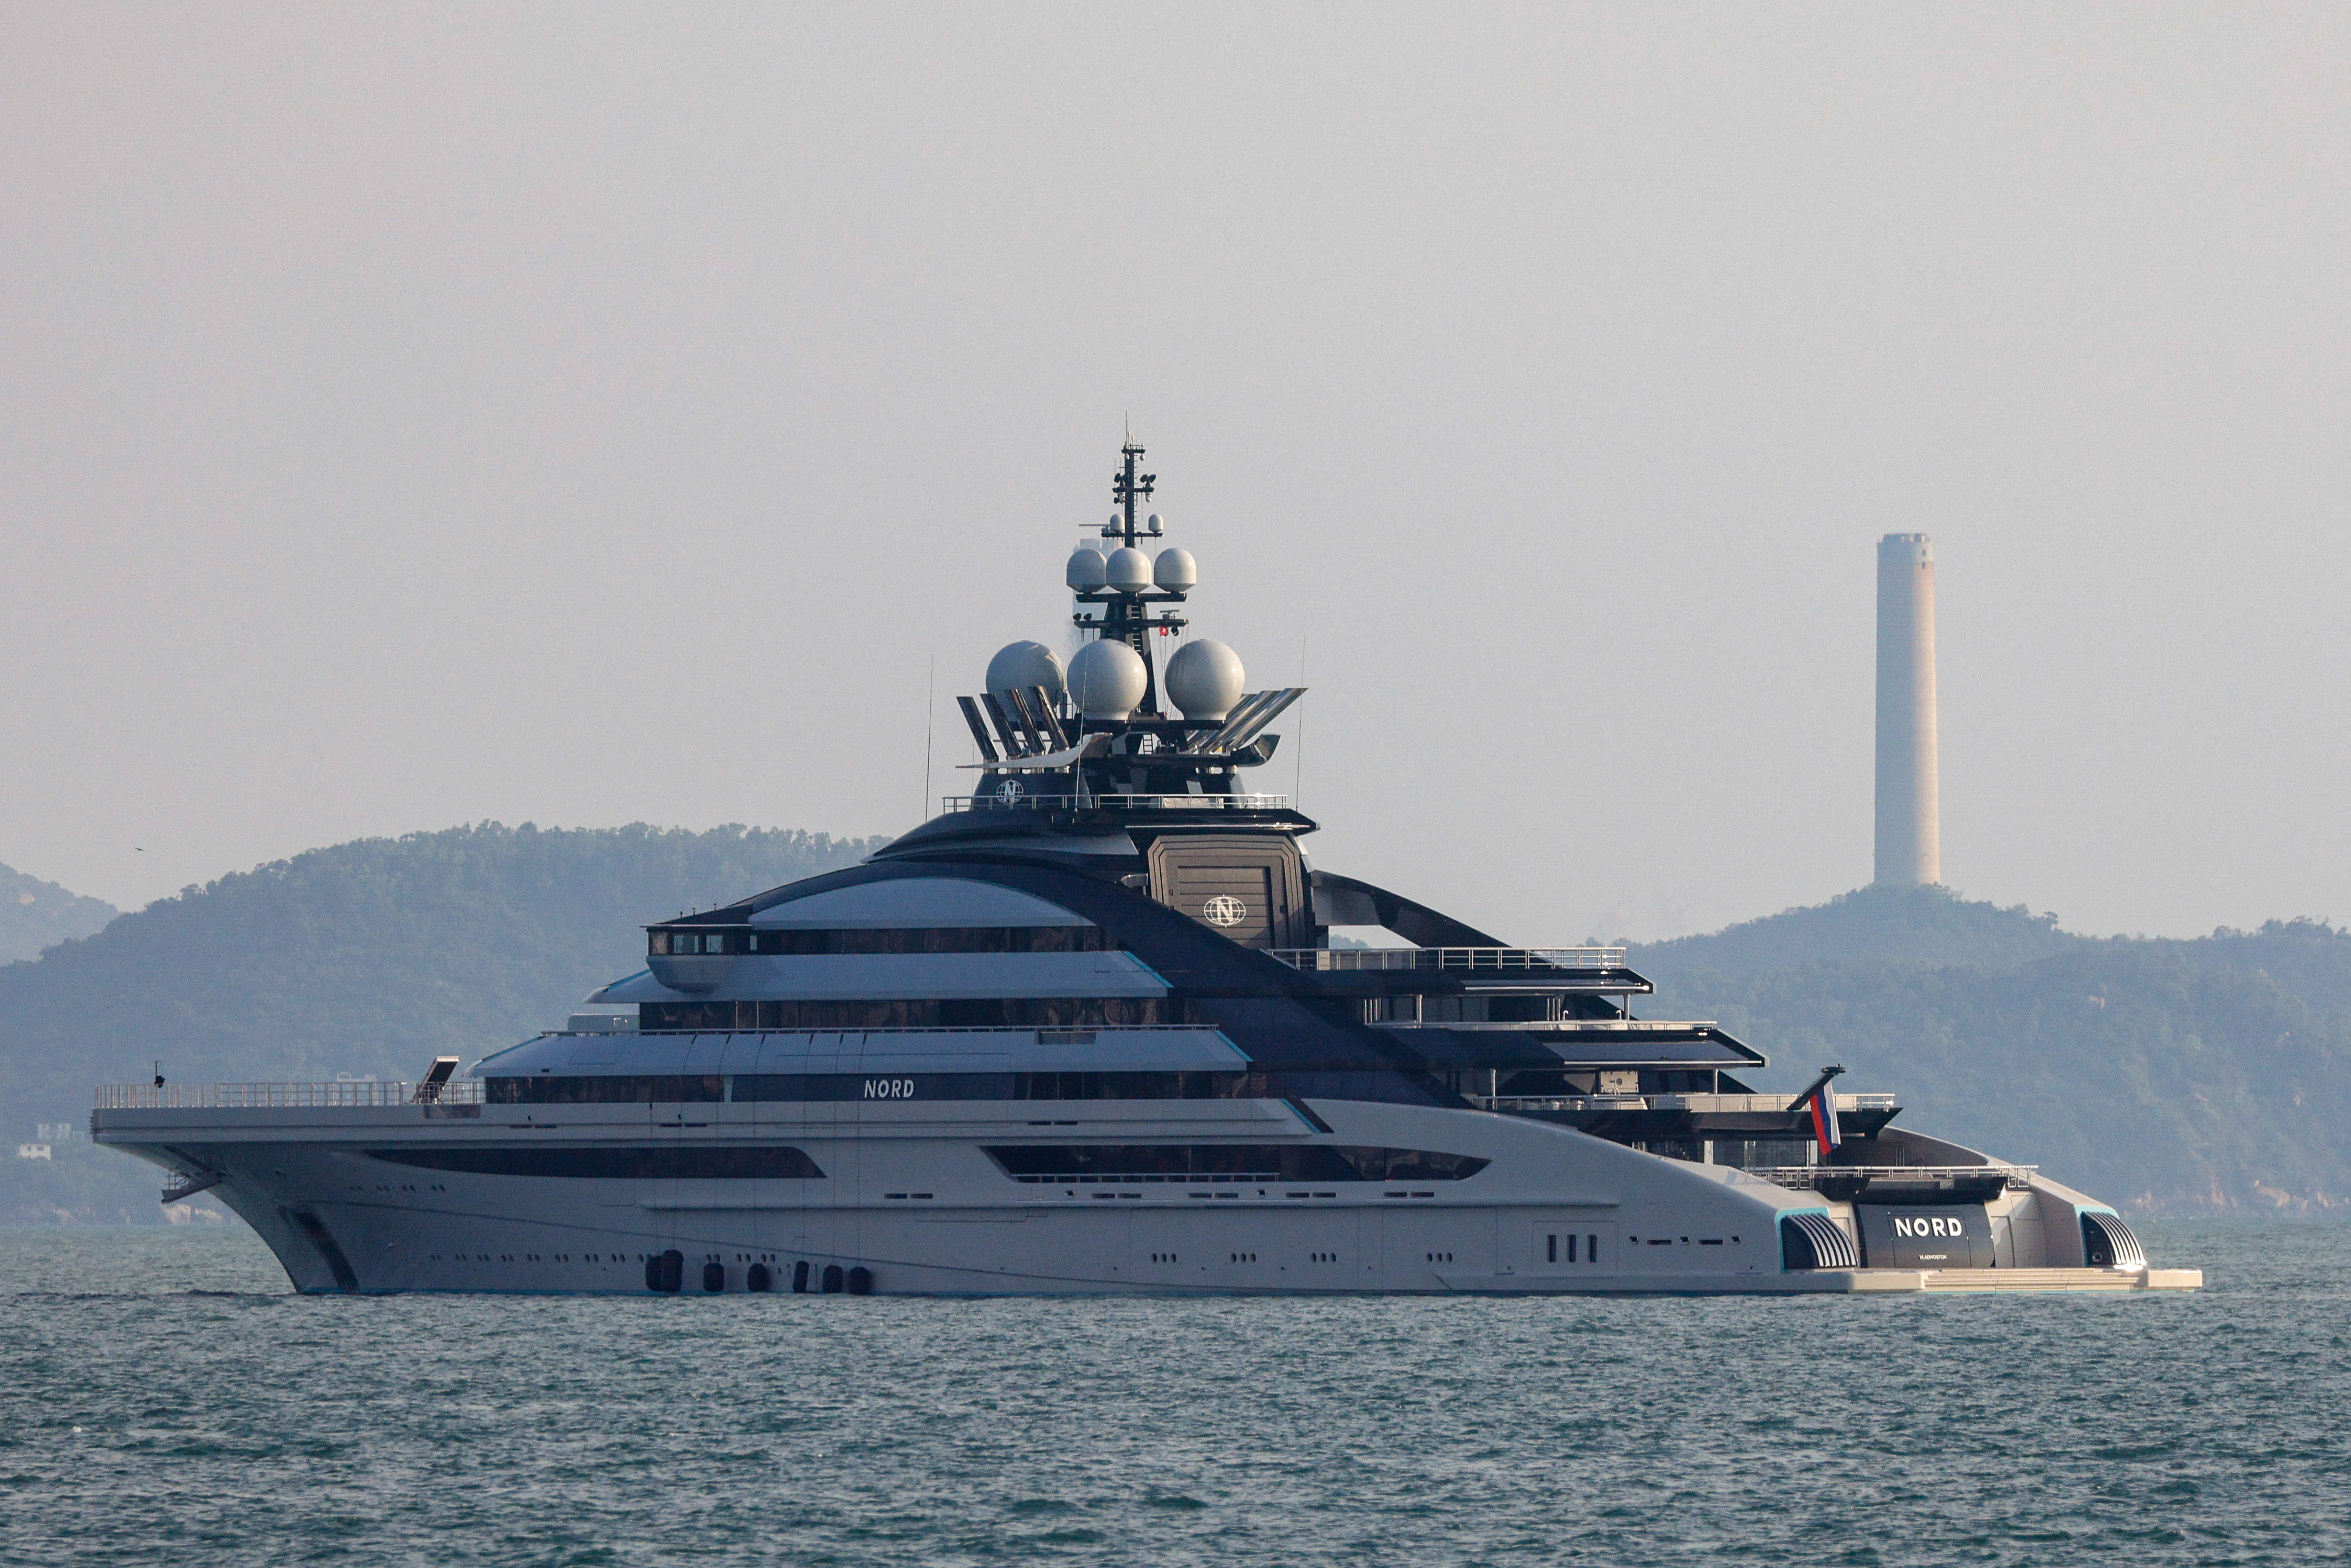 The 465-foot superyacht 